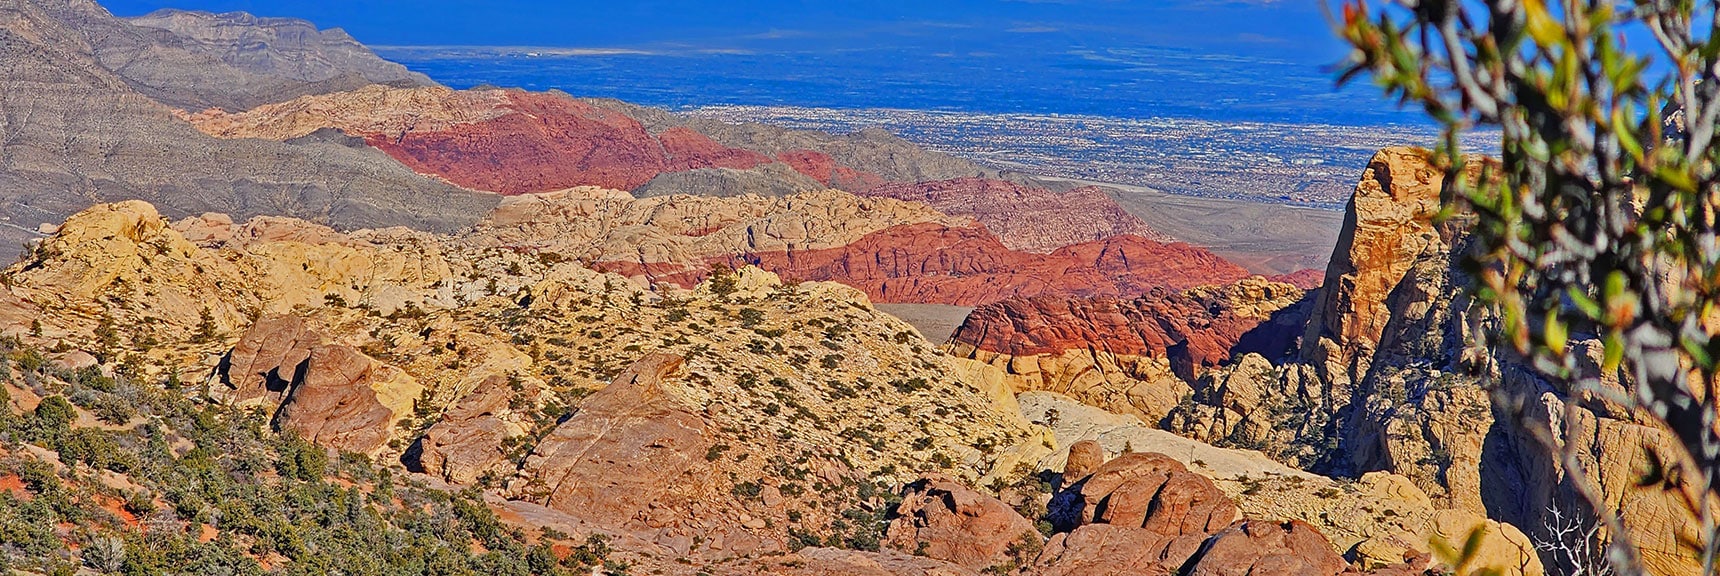 View Down into Red Rock Canyon, Calico Hills. | Mid Upper Crest Ridgeline | Rainbow Mountain Wilderness, Nevada